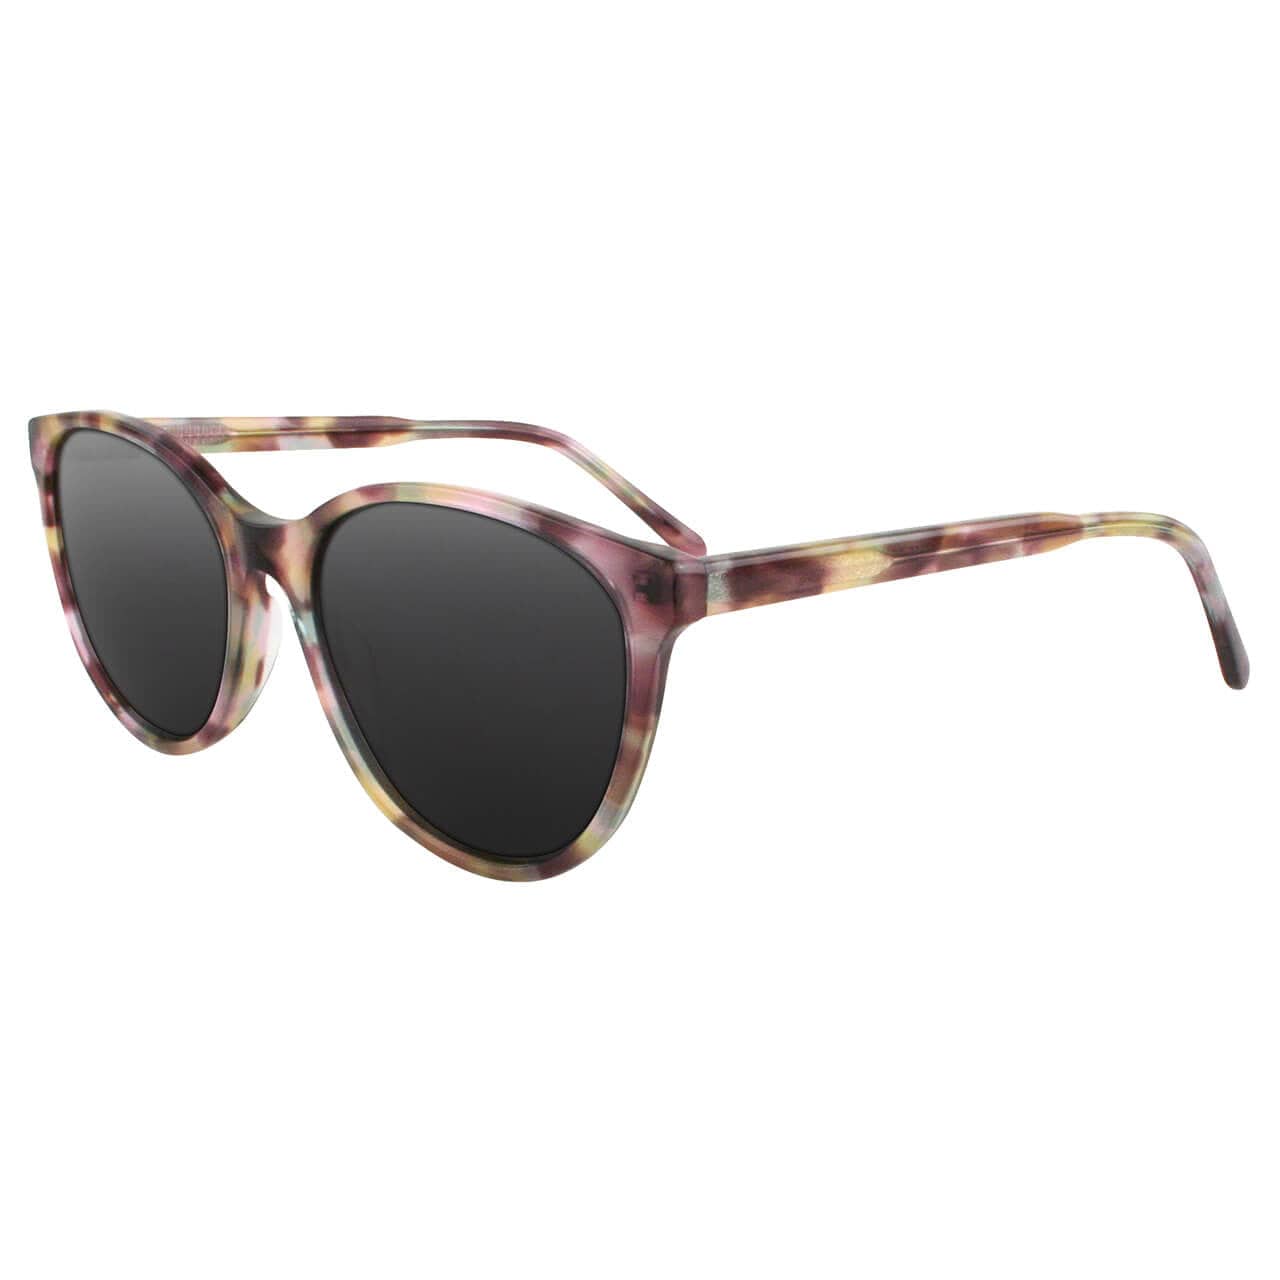 Solect Phase Sunglasses with Tortoise Pink Frame and Gray Polarized Lenses